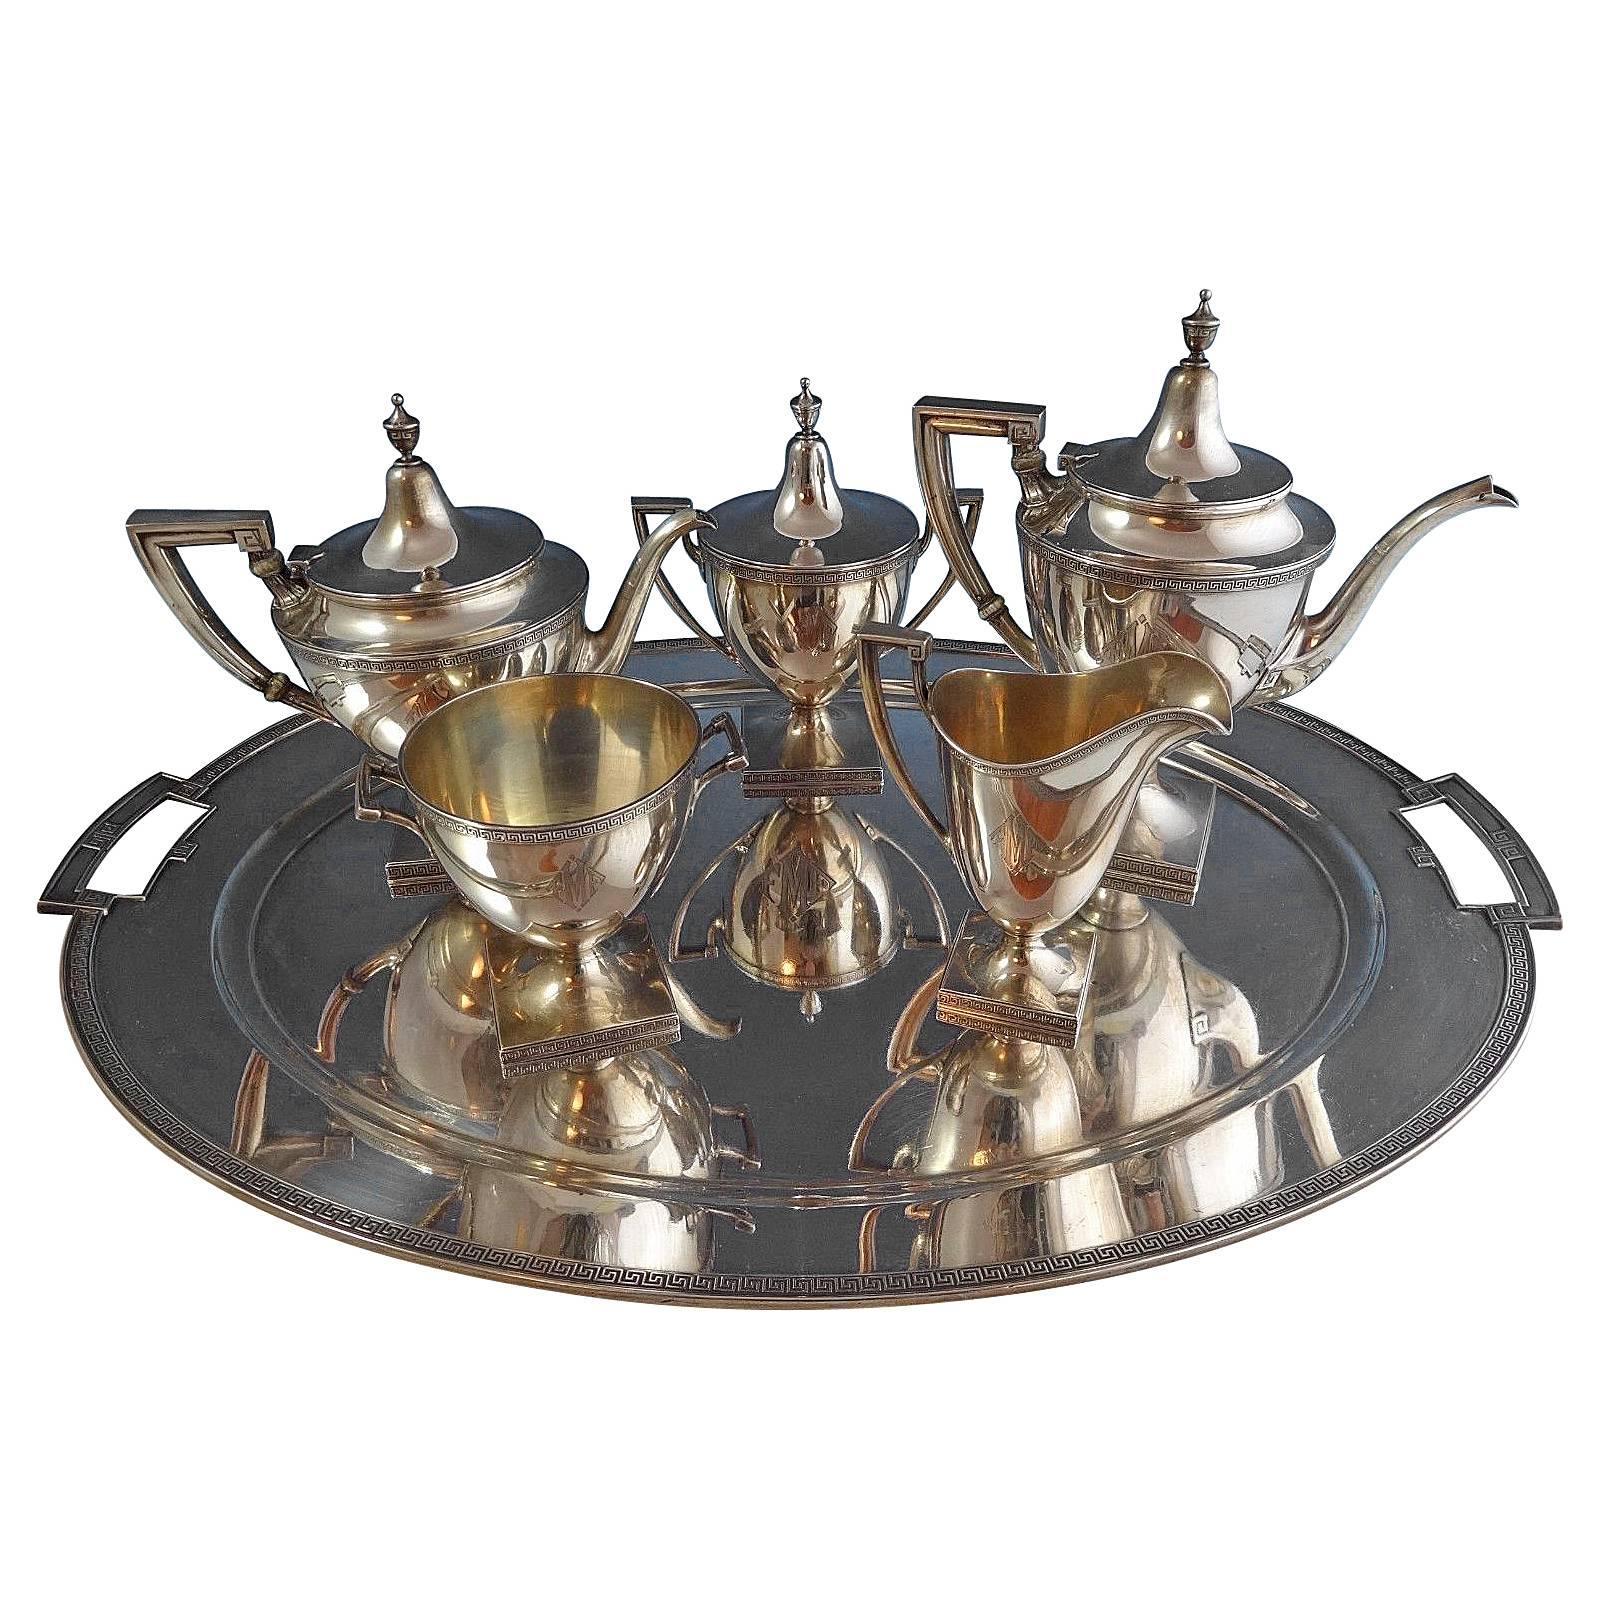 Etruscan by Gorham Sterling Silver Tea Set, Six-Piece with Tray